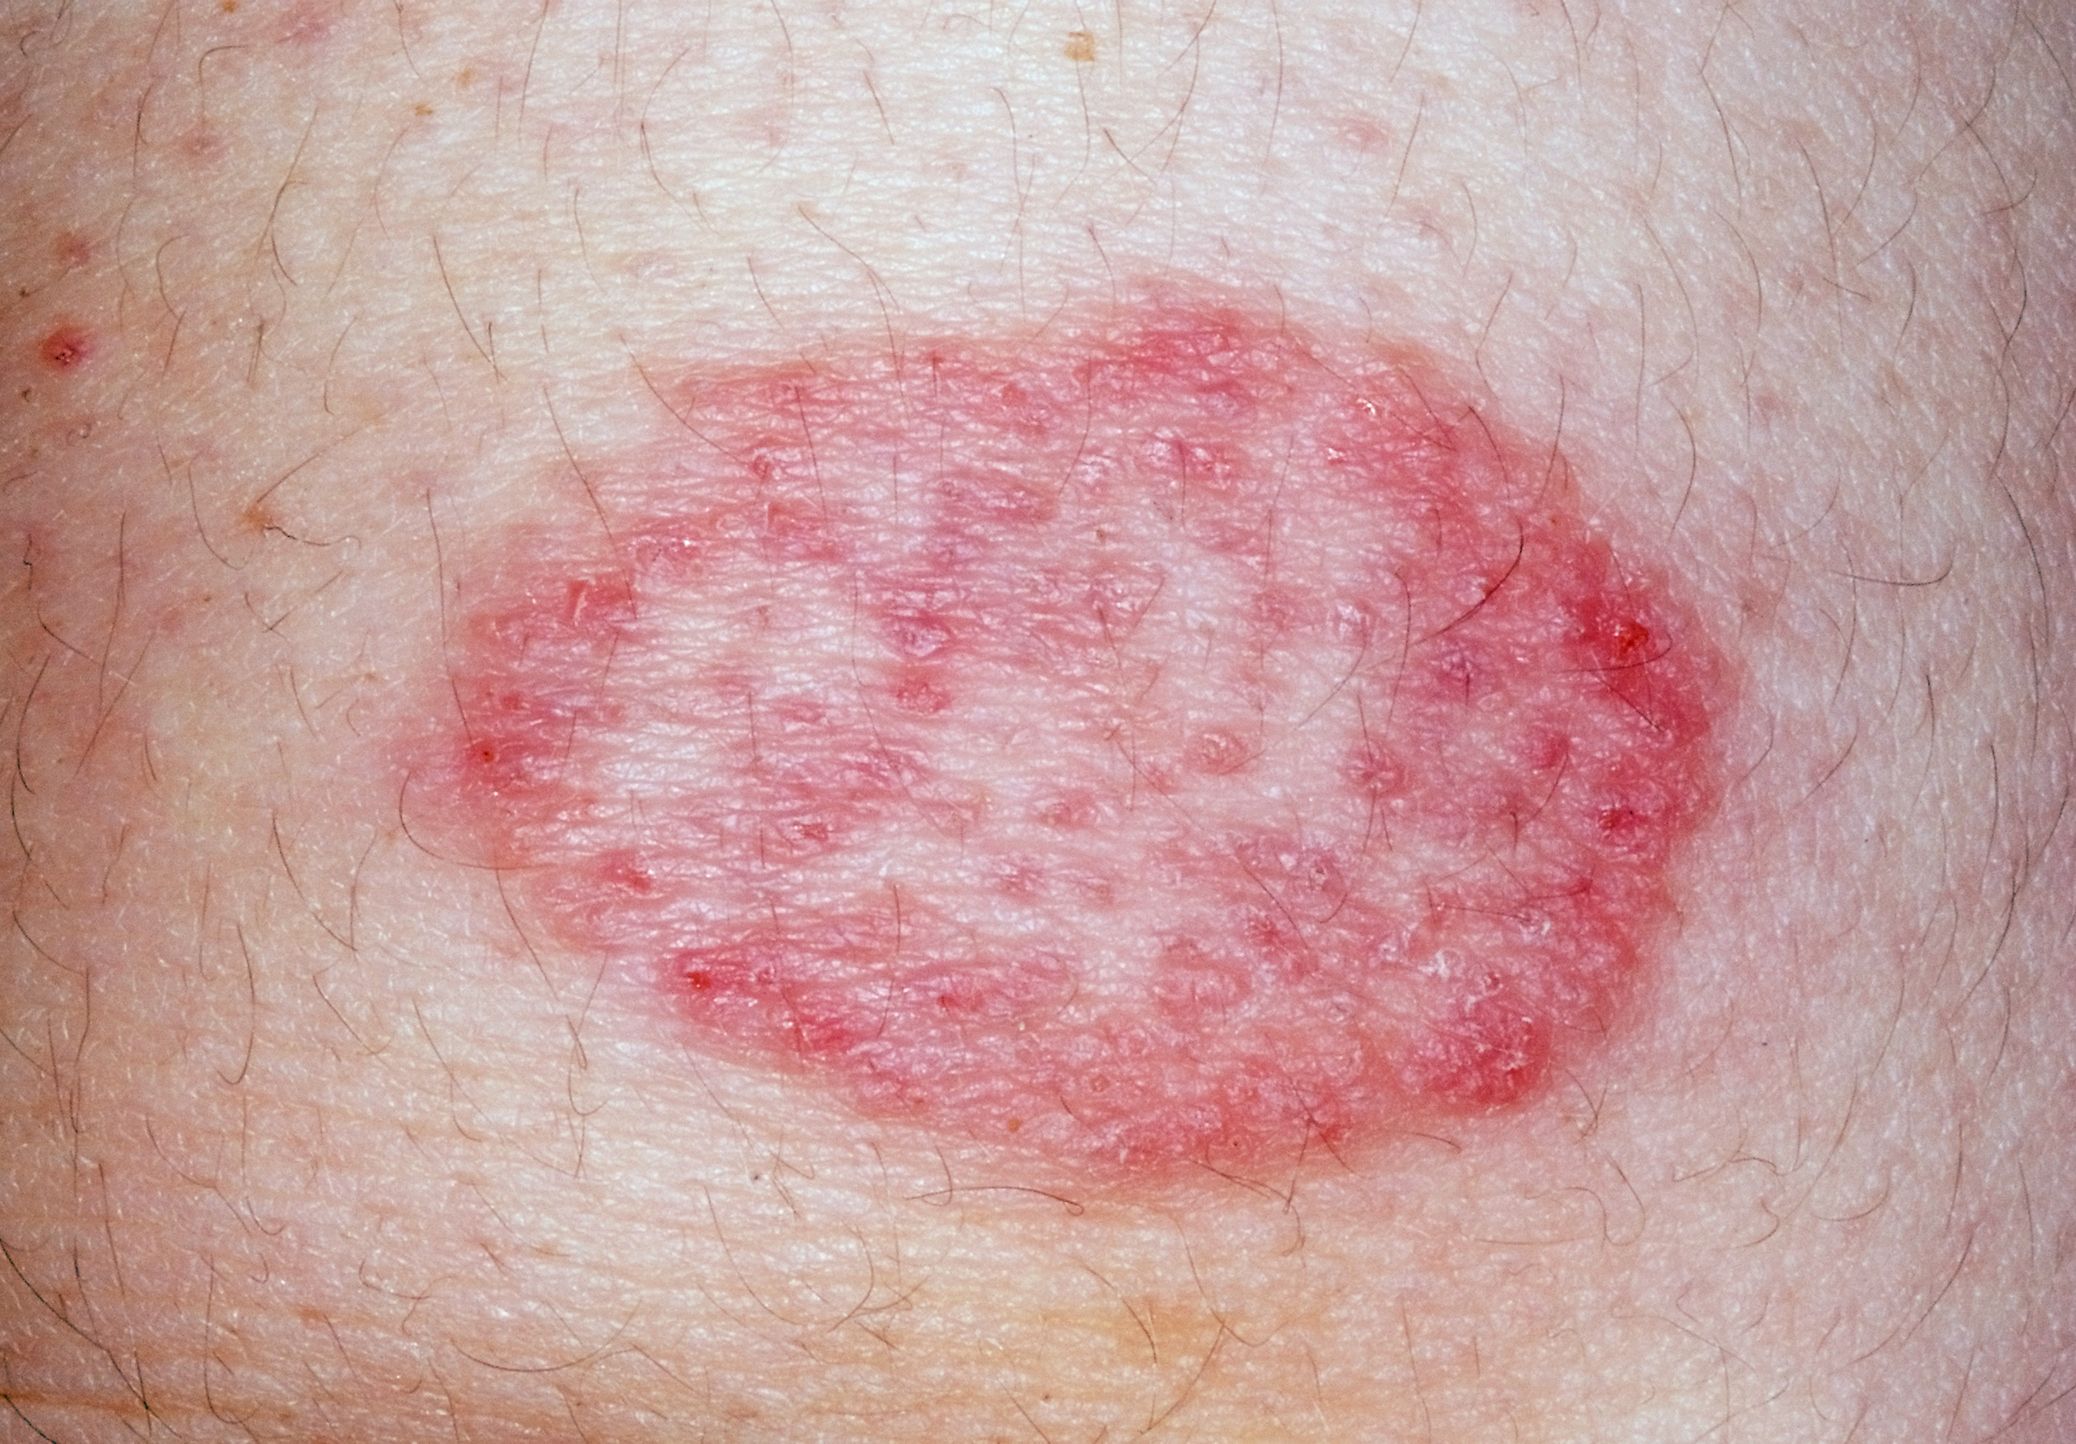 What Do Red Spots On Skin Mean? 13 Skin Spots & Bumps Pictures